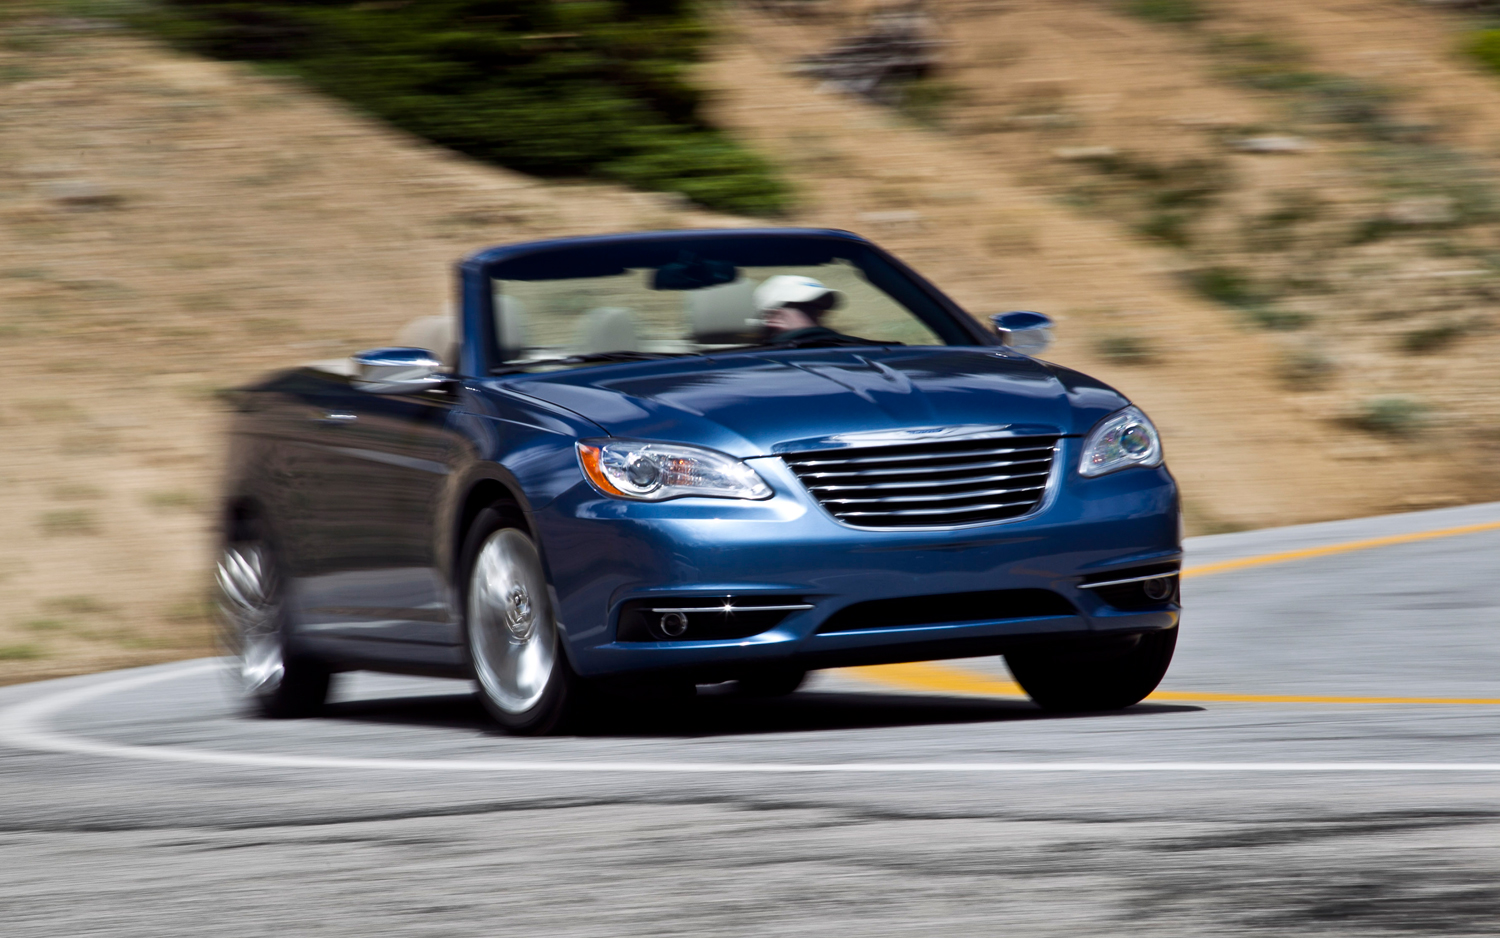 Chrysler 200 Cabrio technical details, history, photos on